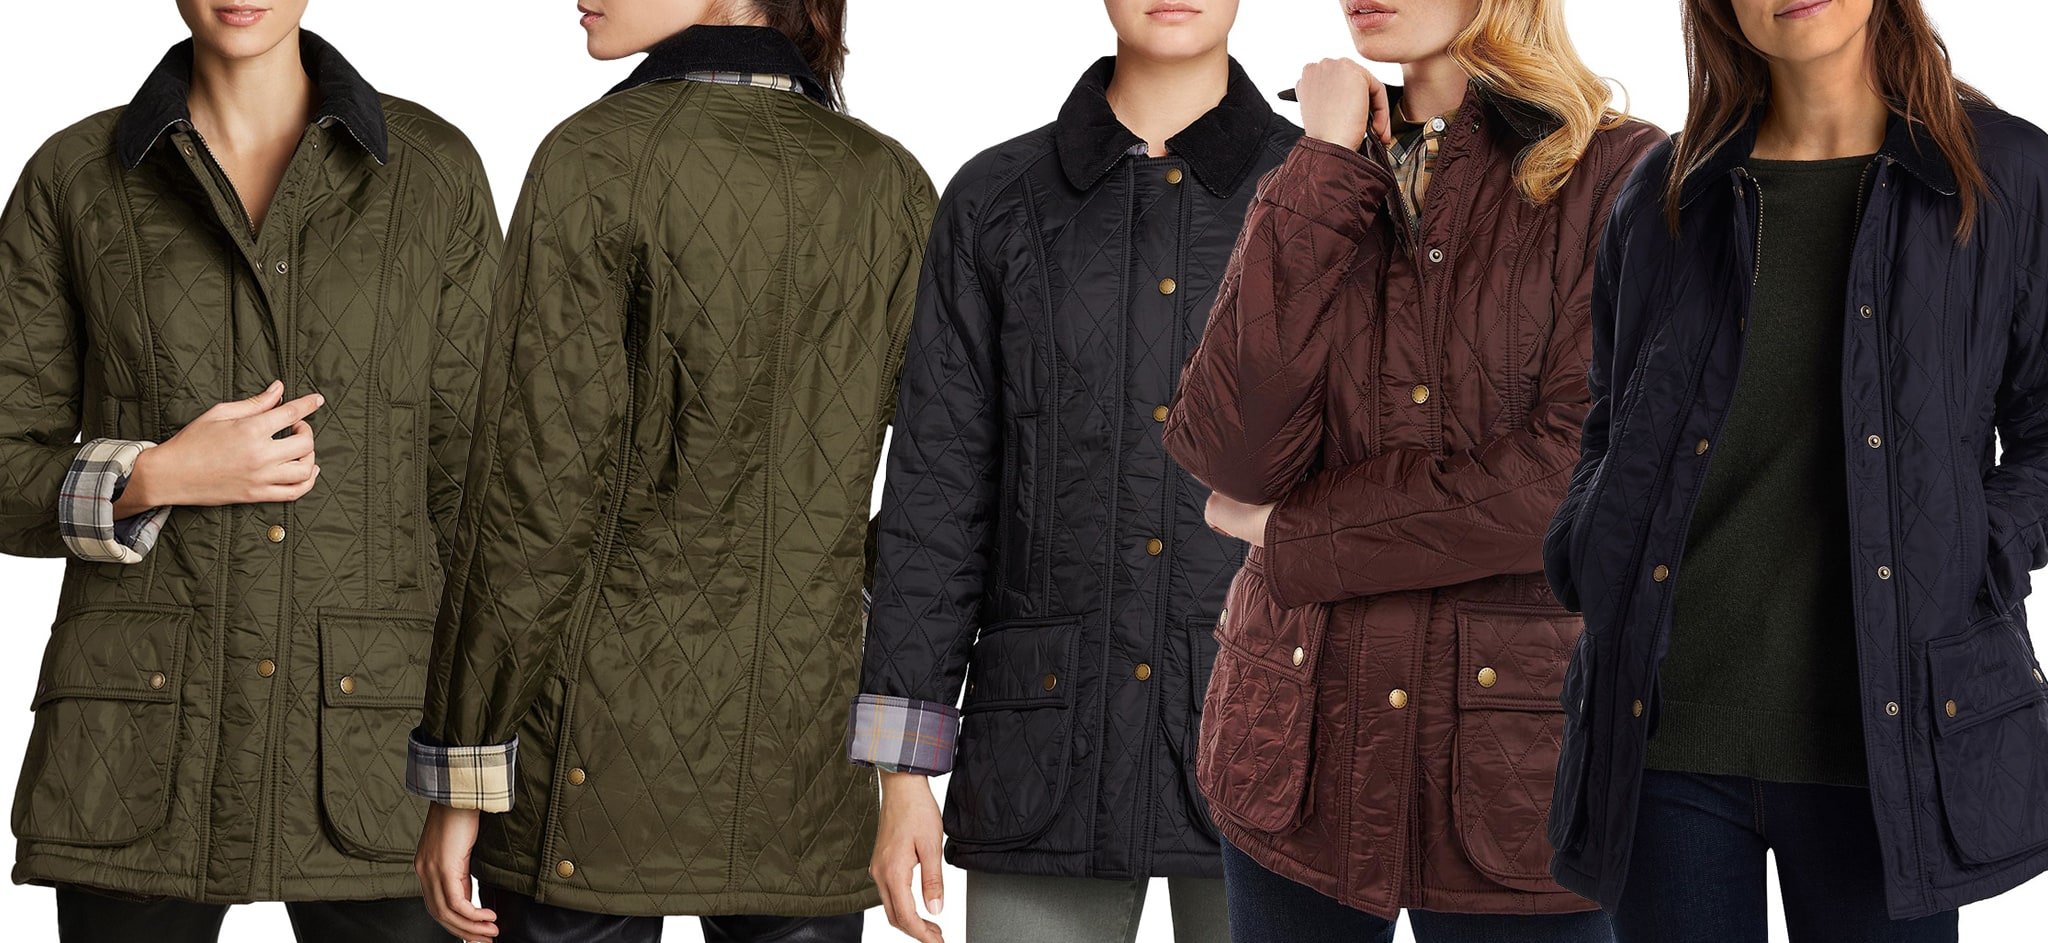 Warm and stylish, the Barbour Beadnell jacket features iconic diamond quilting, a corduroy collar, and a plaid lining